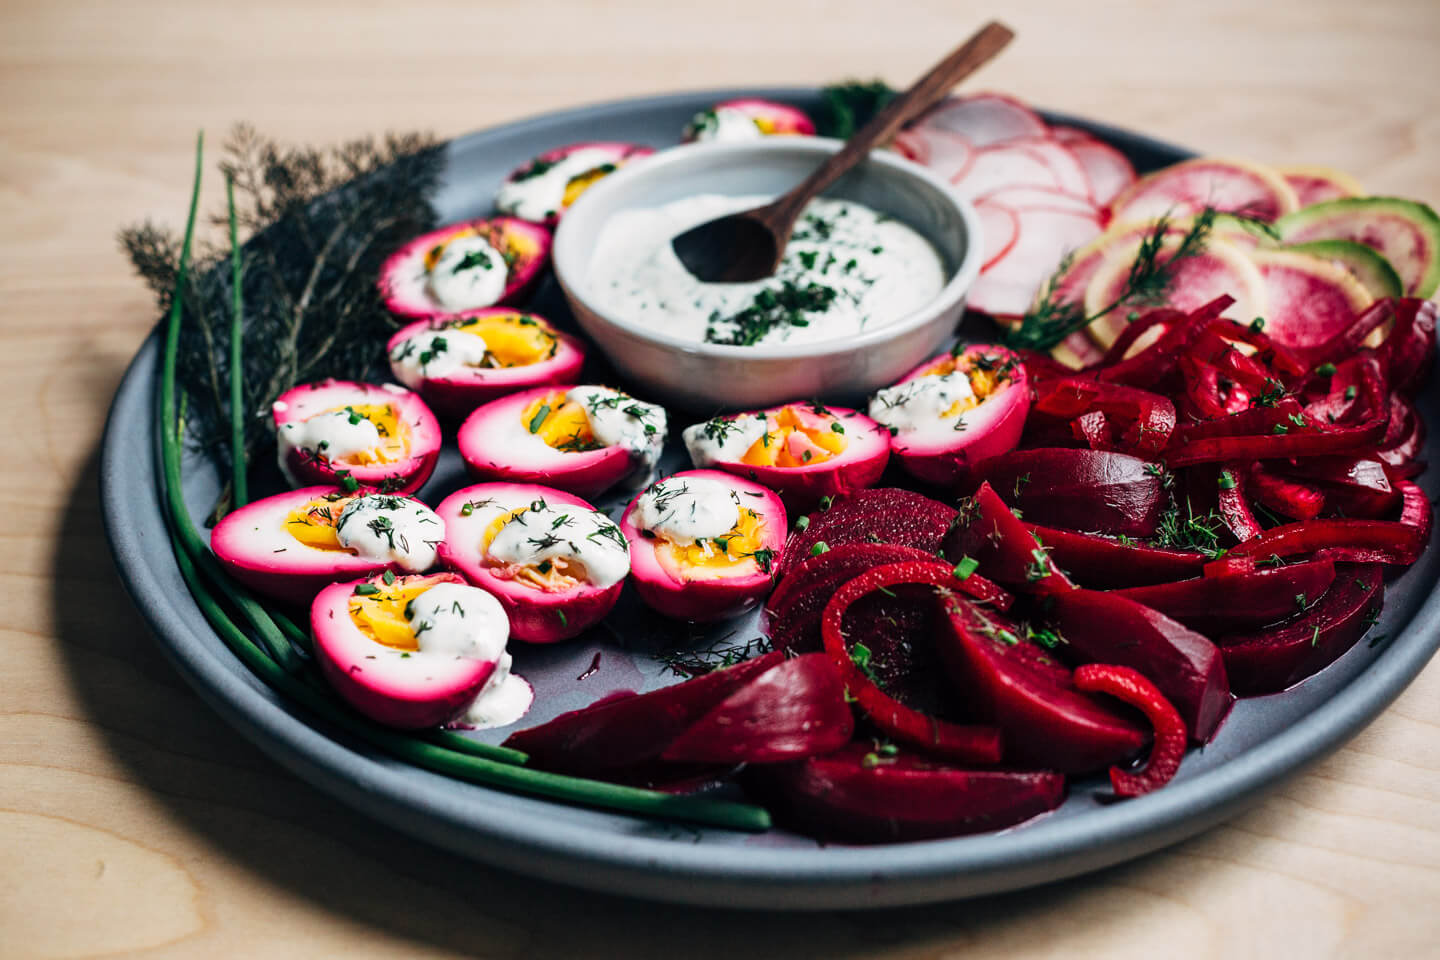 Extremely pink beet-pickled eggs aren't just beautiful, they're suffused with a richly flavored sweet and sour brine that pops with every bite. Serve the eggs alongside the pickled beets and red onions, and top with a dollop of sour cream and horseradish sauce and fresh garden herbs.